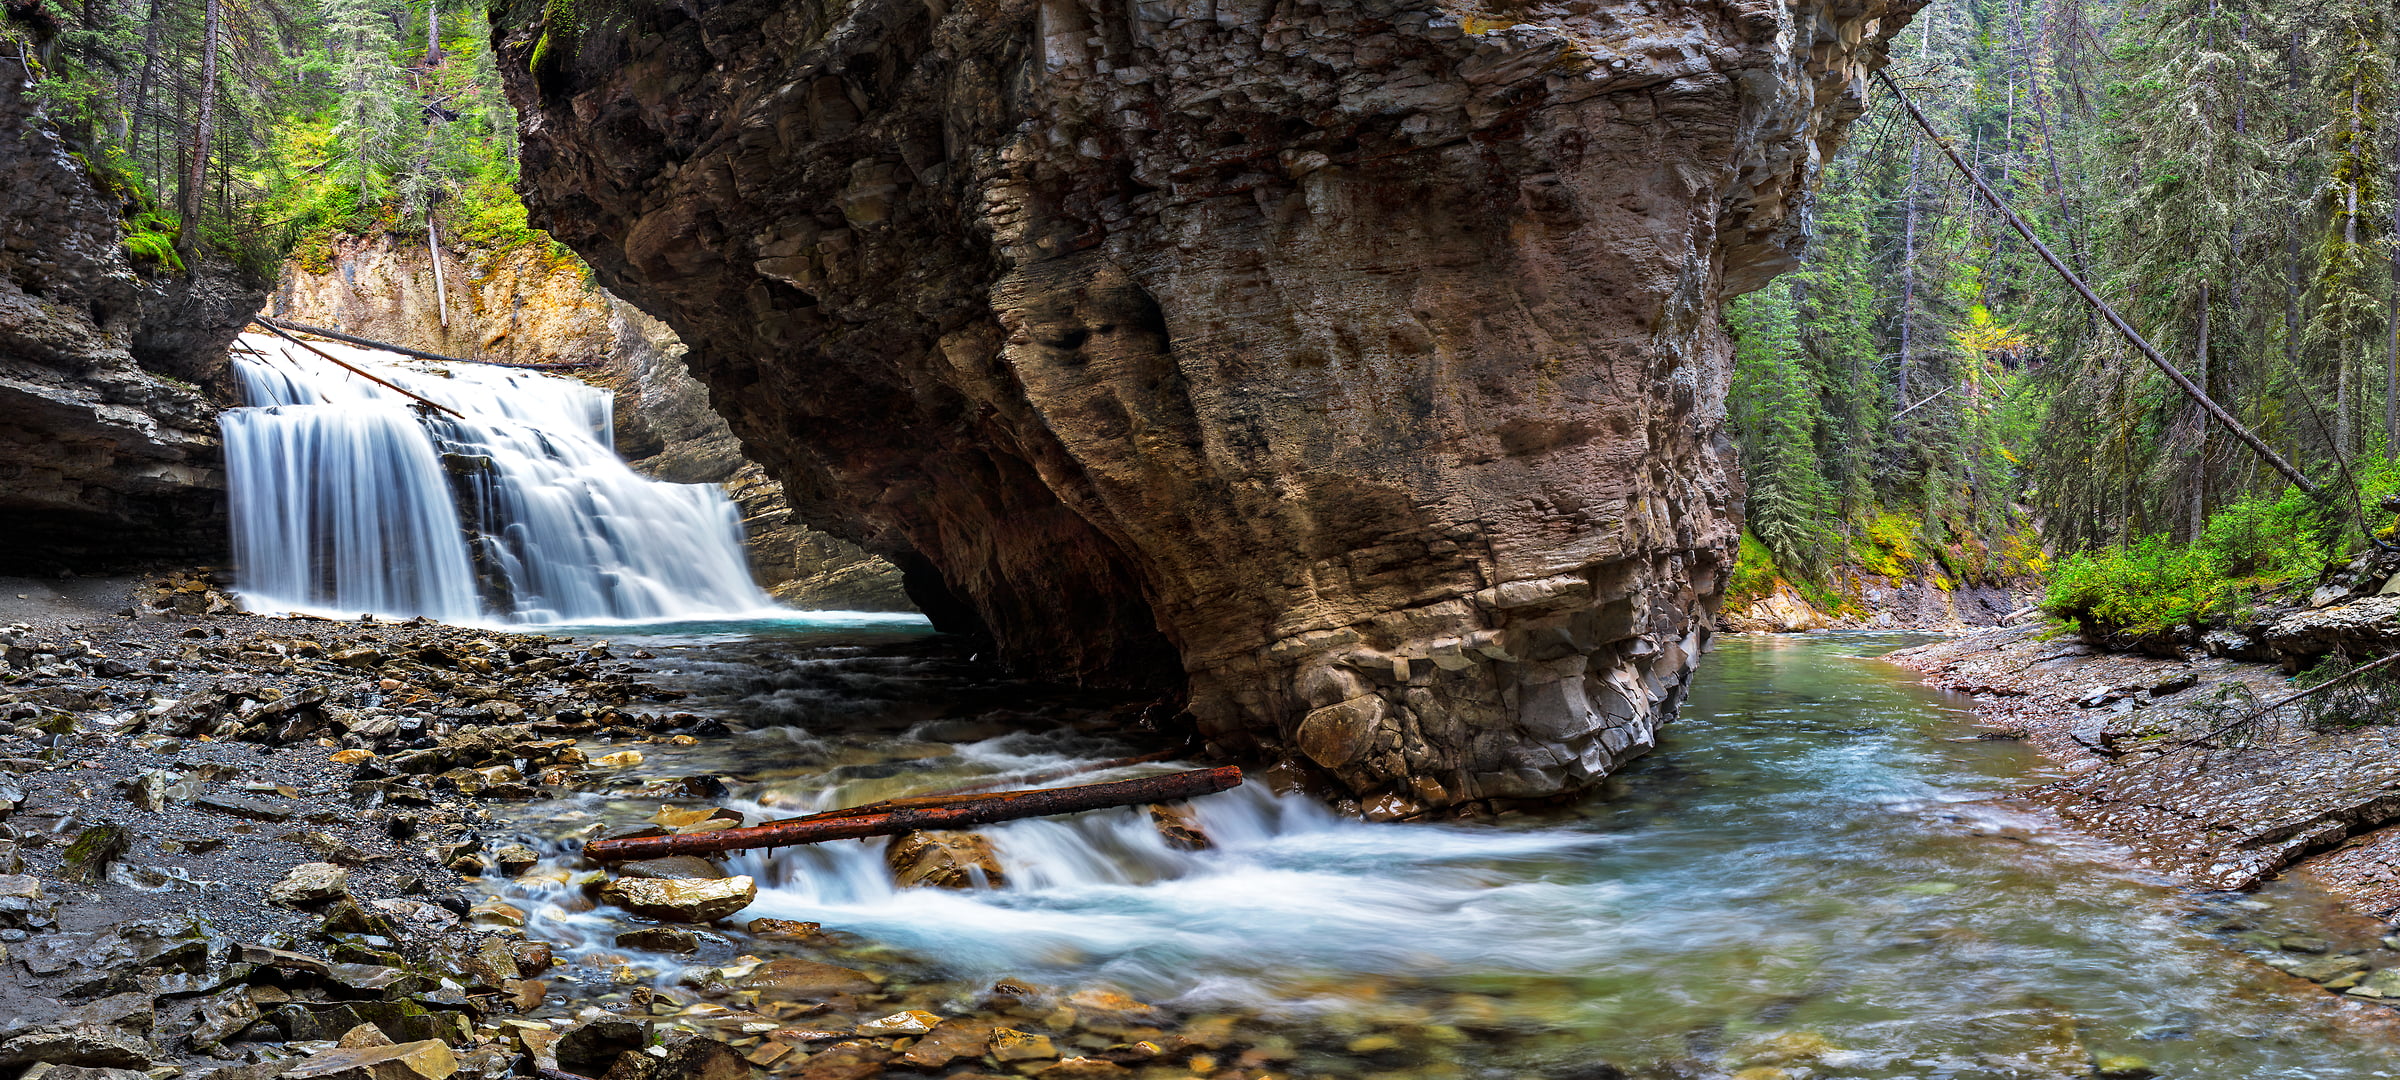 310 megapixels! A very high resolution, large-format VAST photo print of a waterfall, stream, rocks, and forest in the woods; fine art nature photo created by Chris Collacott in Banff National Park, Alberta, Canada